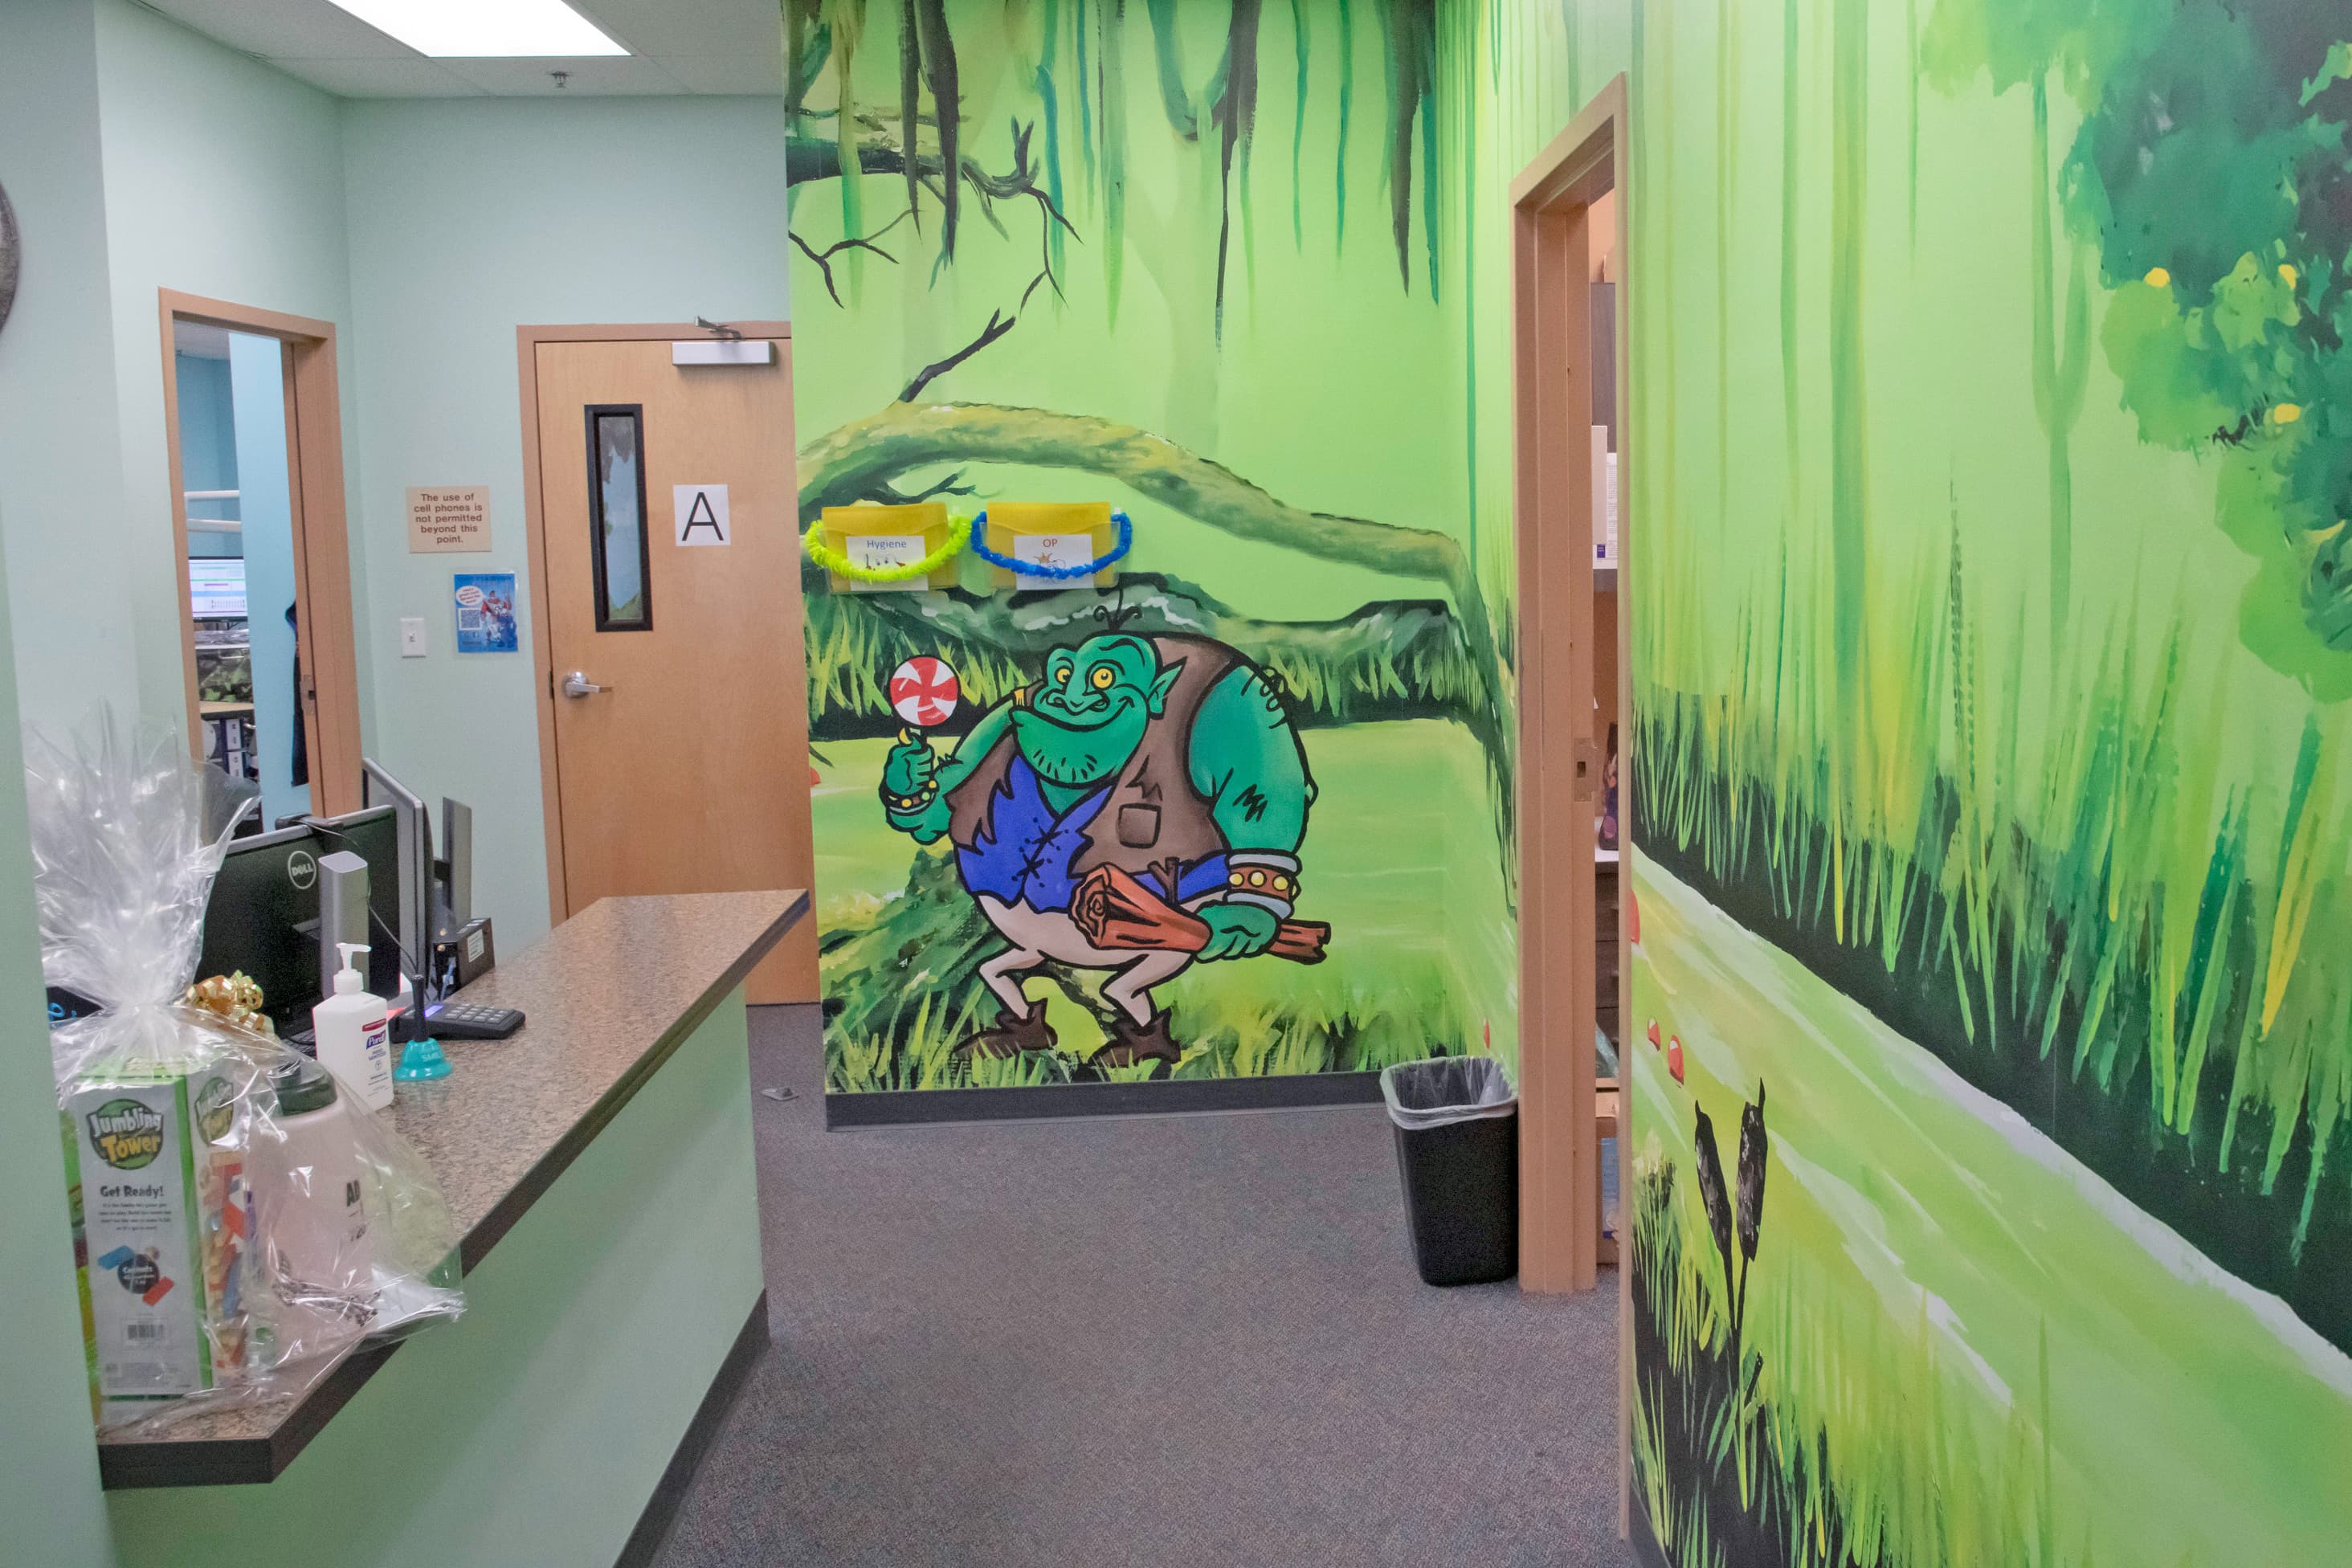 Hallway with colorful mural of an ogre